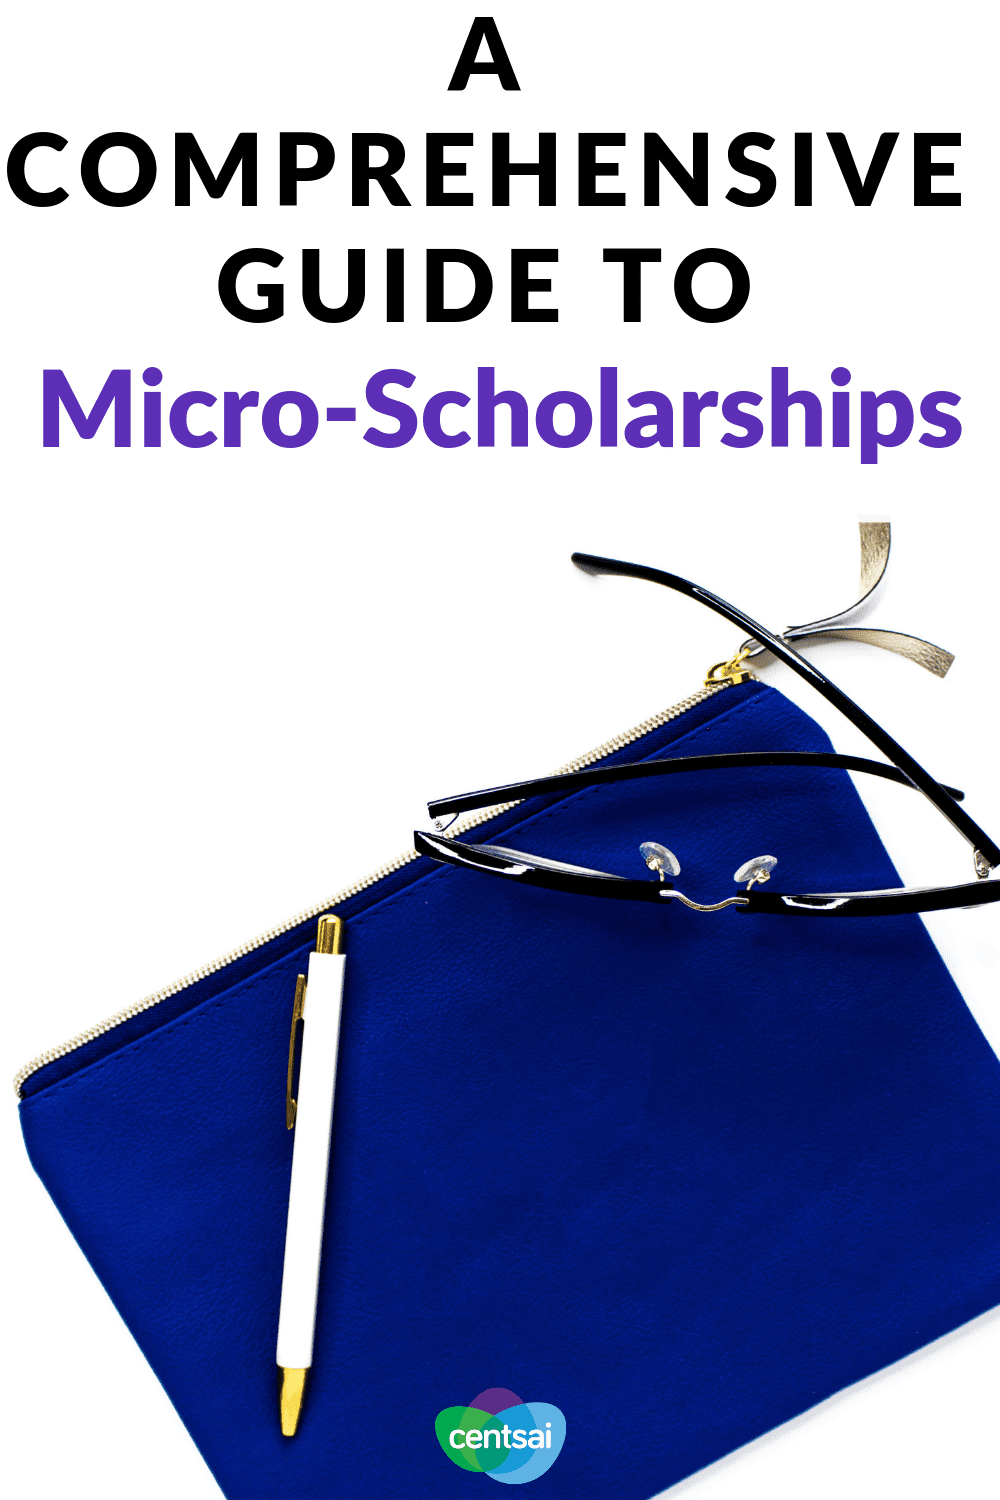 A Comprehensive Guide to Micro-Scholarships. Need more money to pay for college? Then micro-scholarships may be just the thing for you. Learn what they are and how to earn them. #microscholarships #college #scholarships